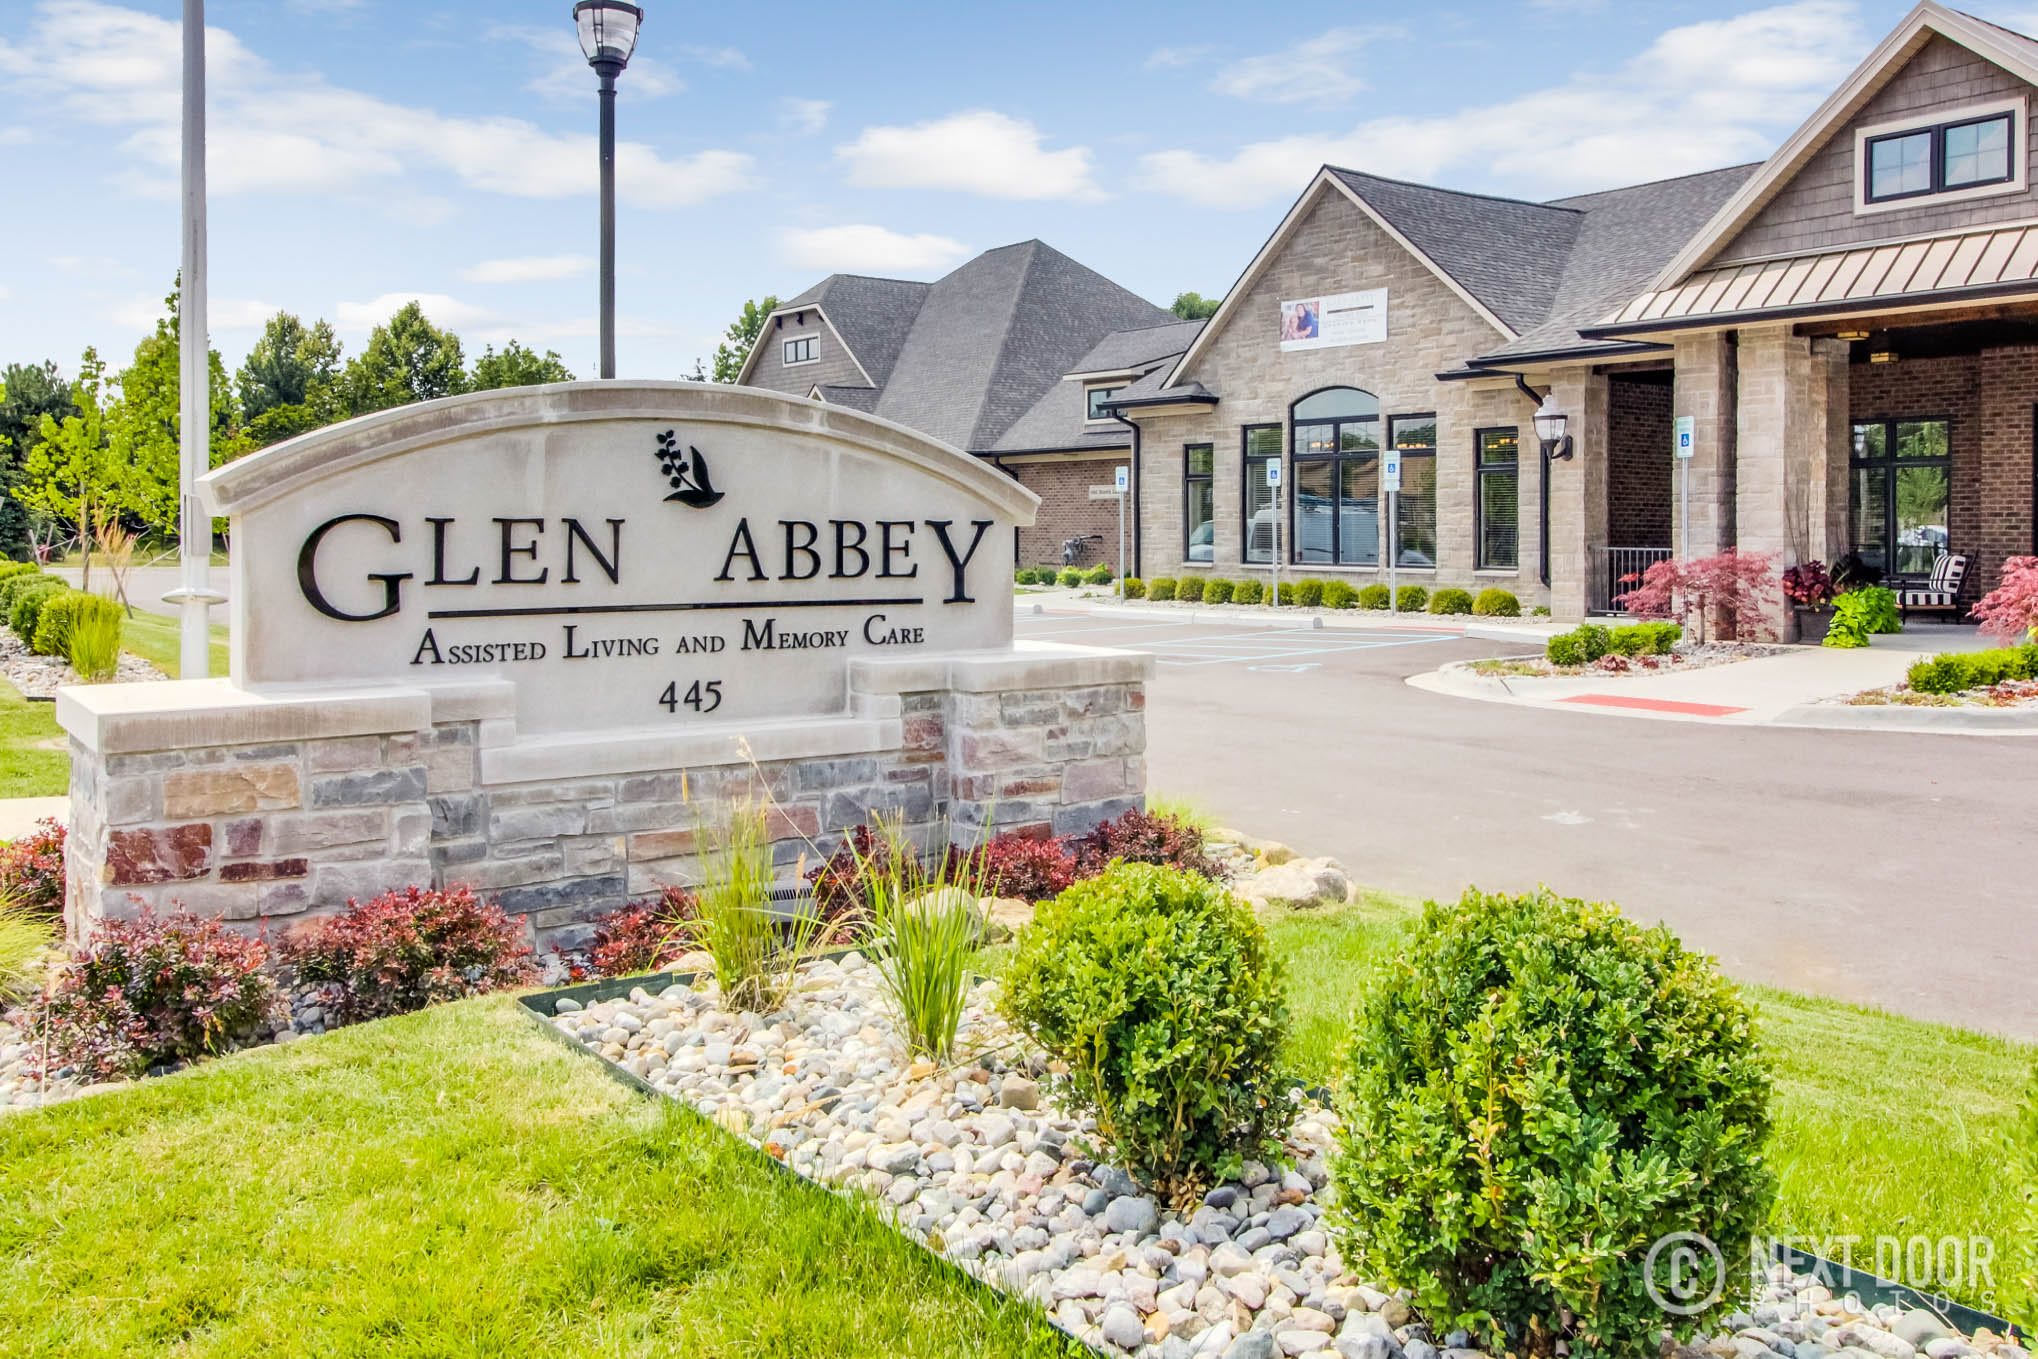 Glen Abbey Assisted Living & Memory Care Entrance